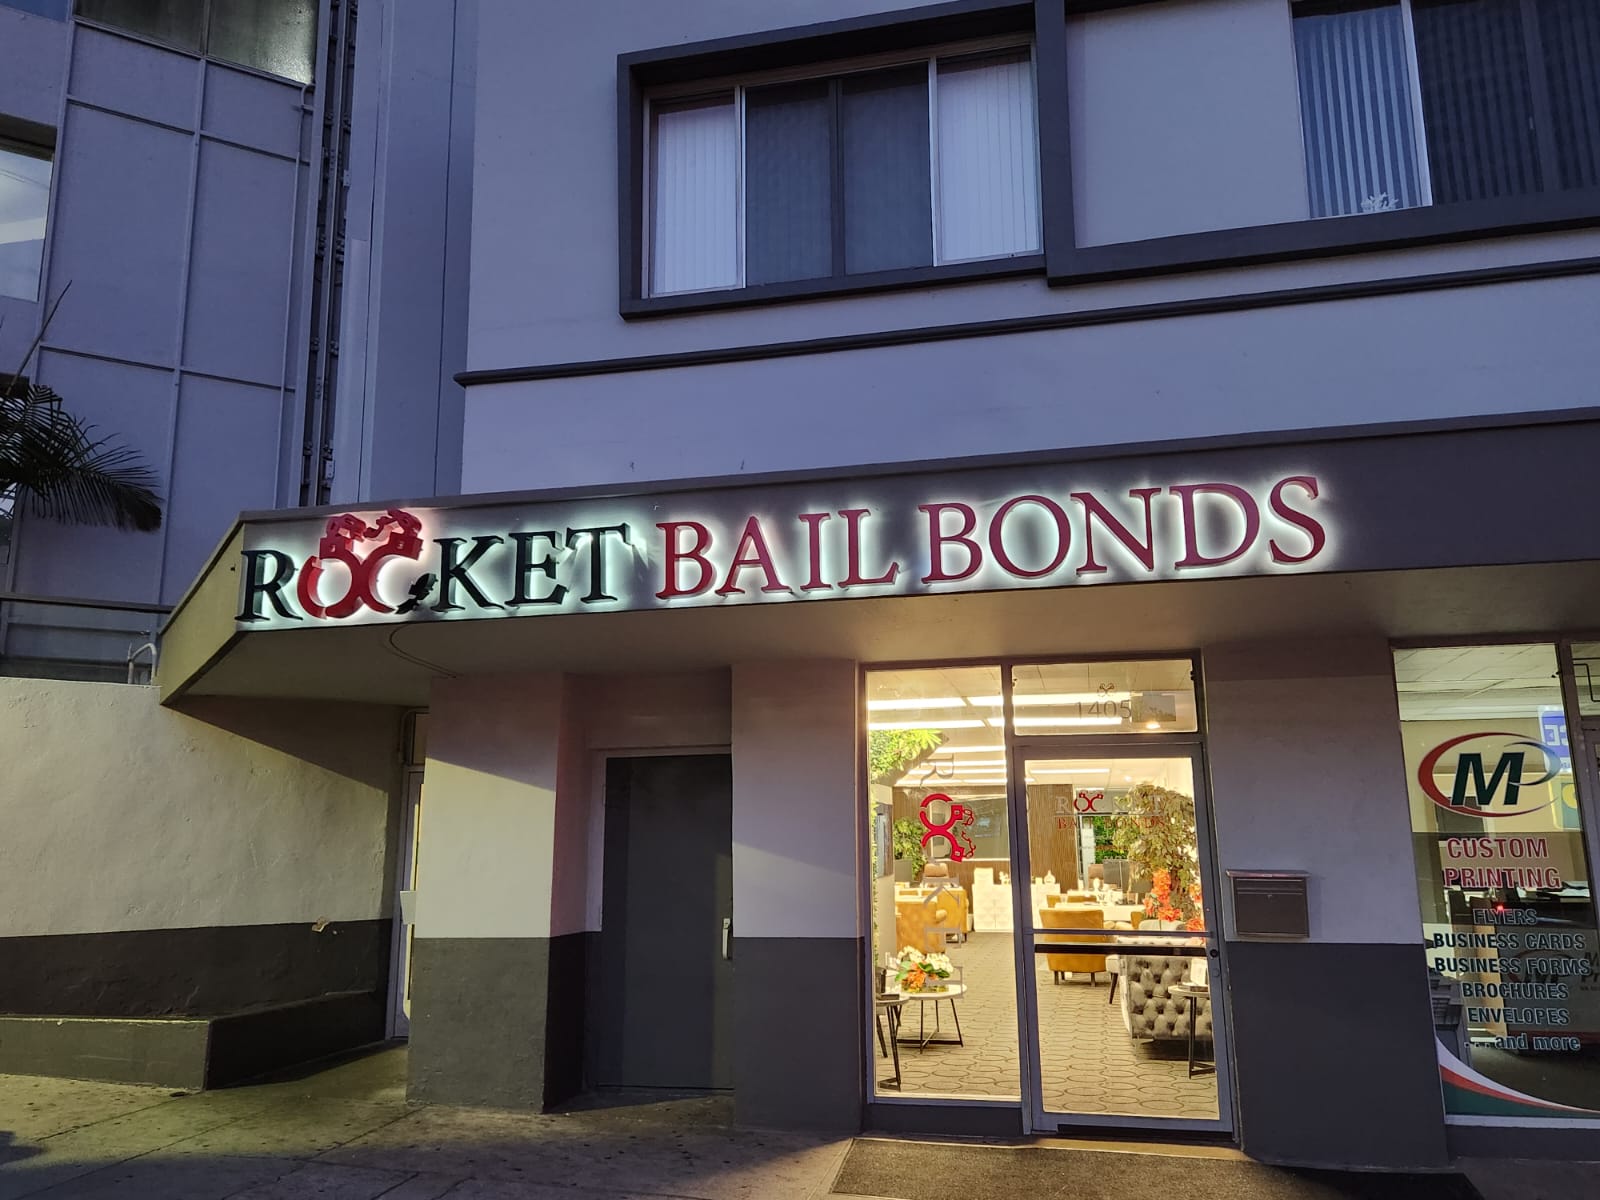 channel Letters Rocket Bail Bond at night